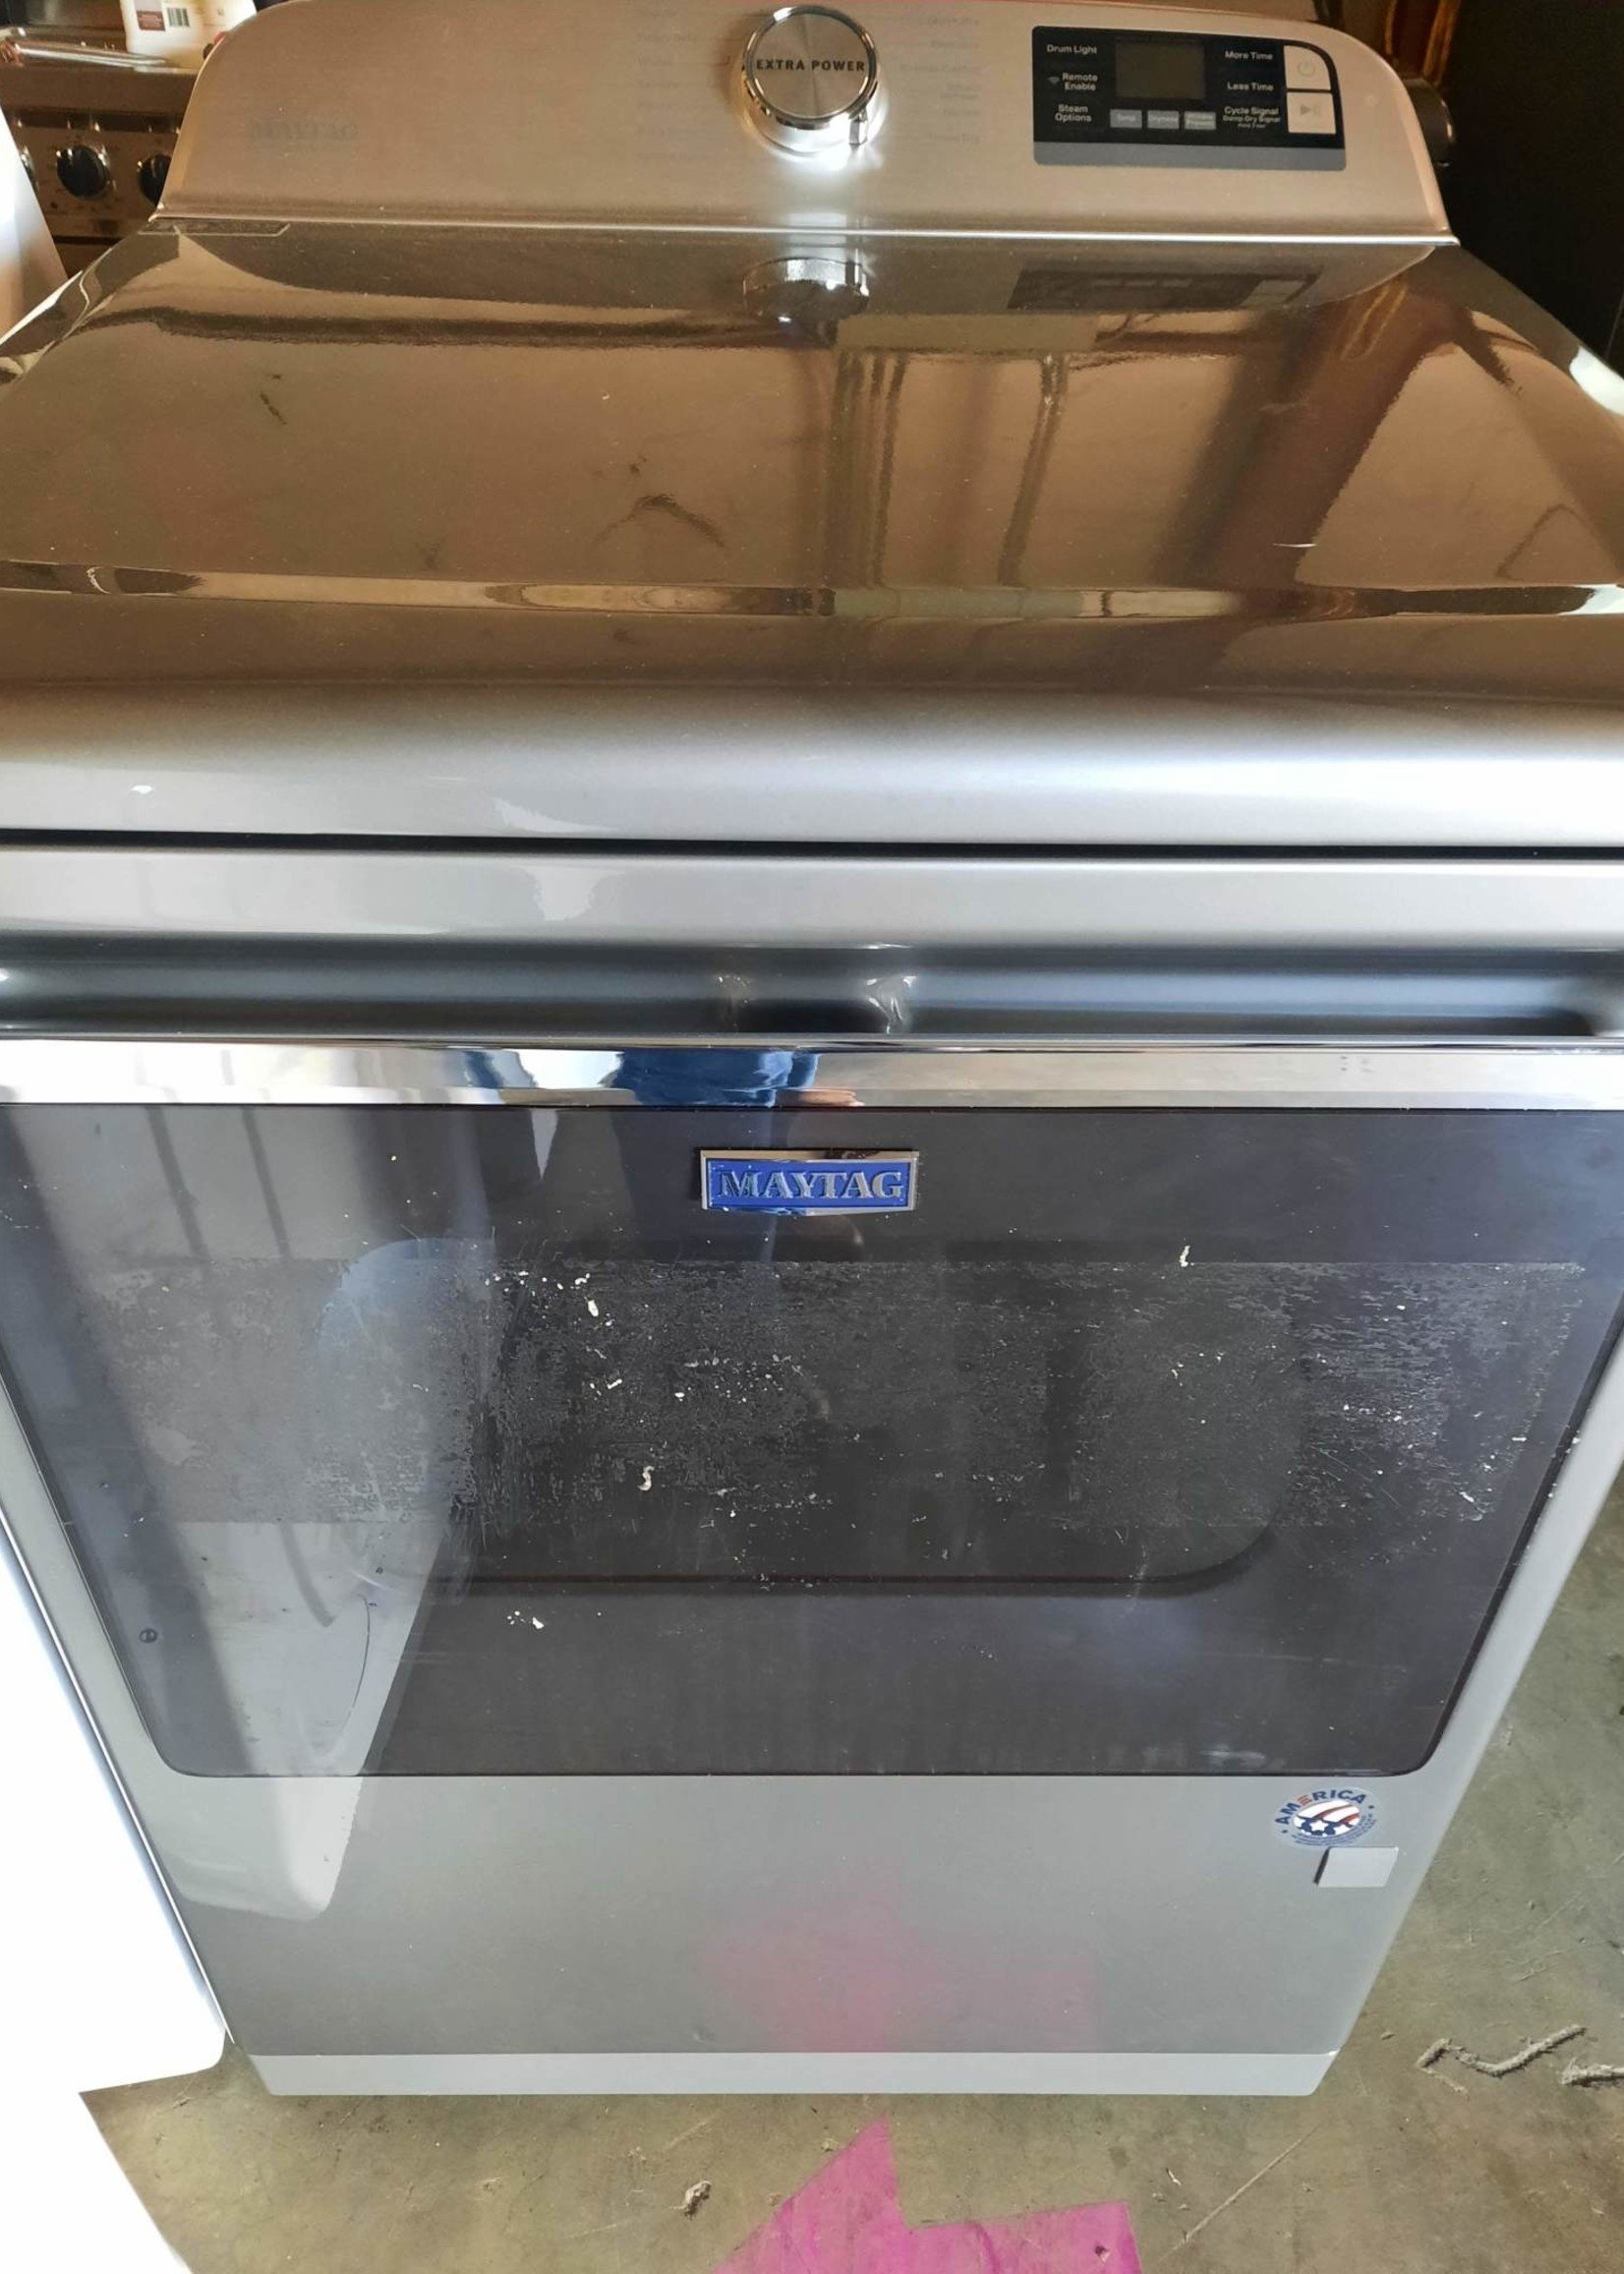 Maytag *Maytag MGD7230HC 7.4 cu. ft. 120-Volt Smart Capable Metallic Slate Gas Vented Dryer with Steam and Hamper Door, ENERGY STAR